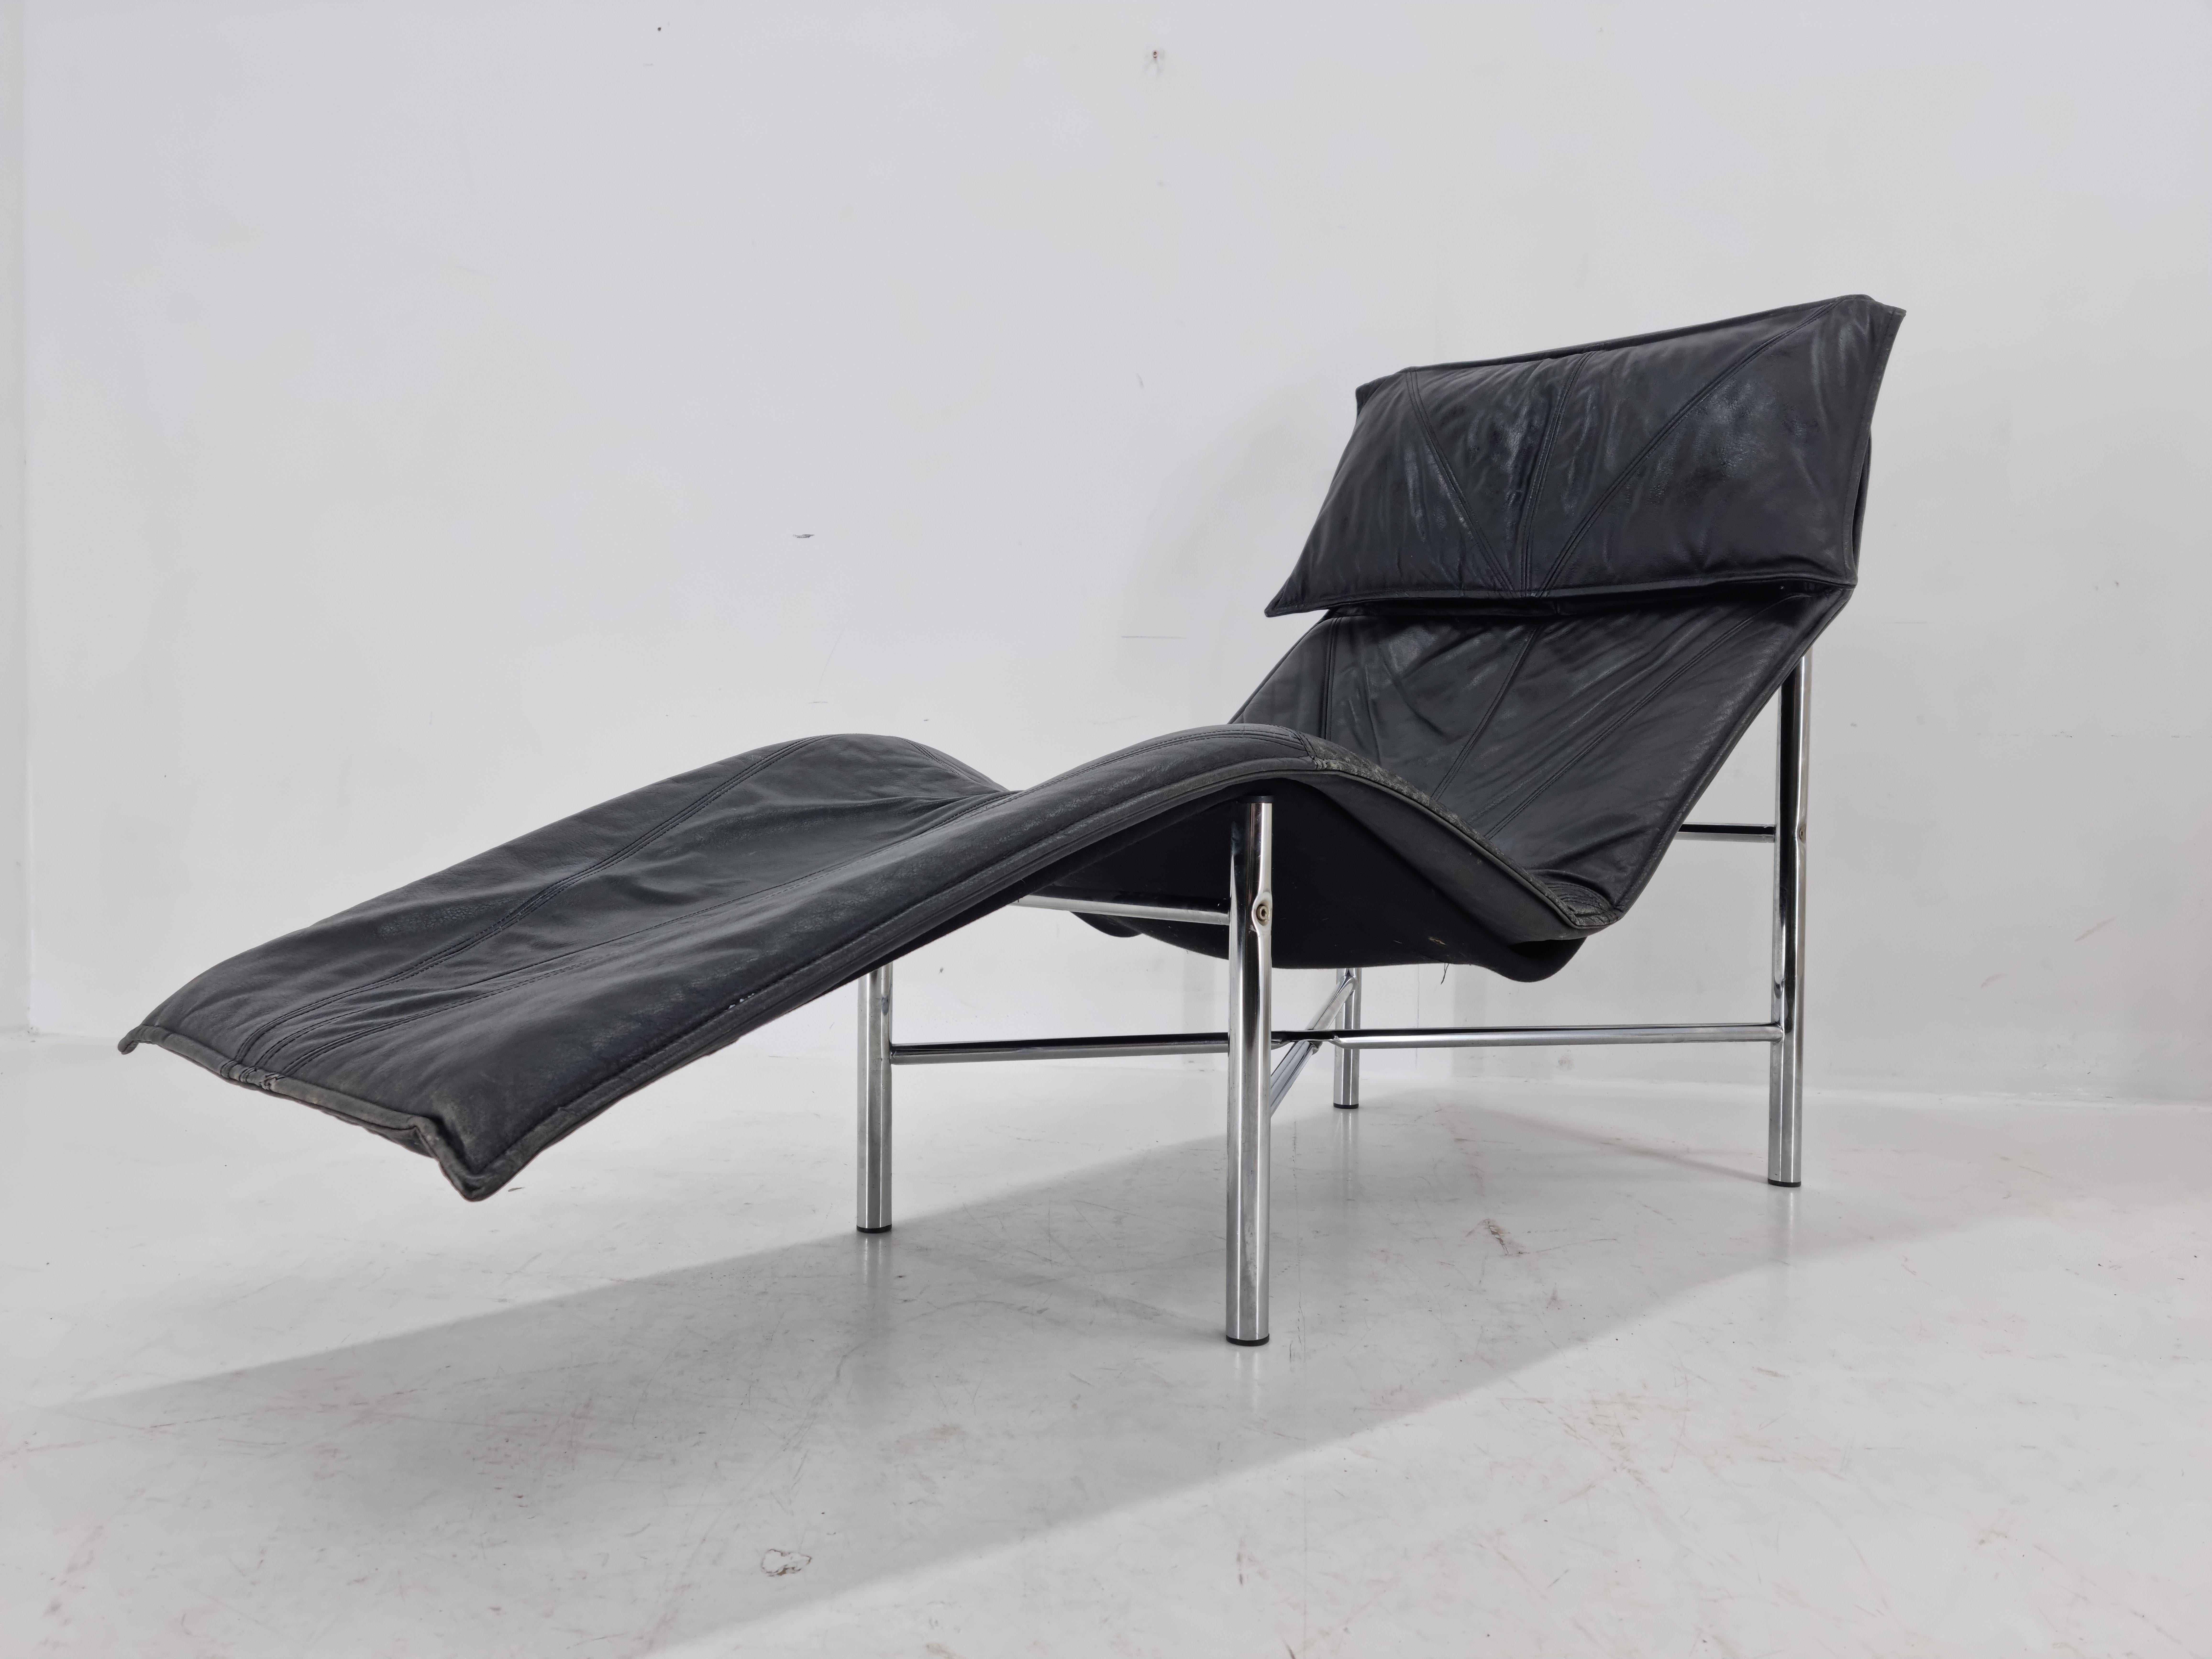 Mid-Century Modern Midcentury Skye Chaise Lounge Chair for IKEA by Tord Björklund, Sweden, 1970s For Sale